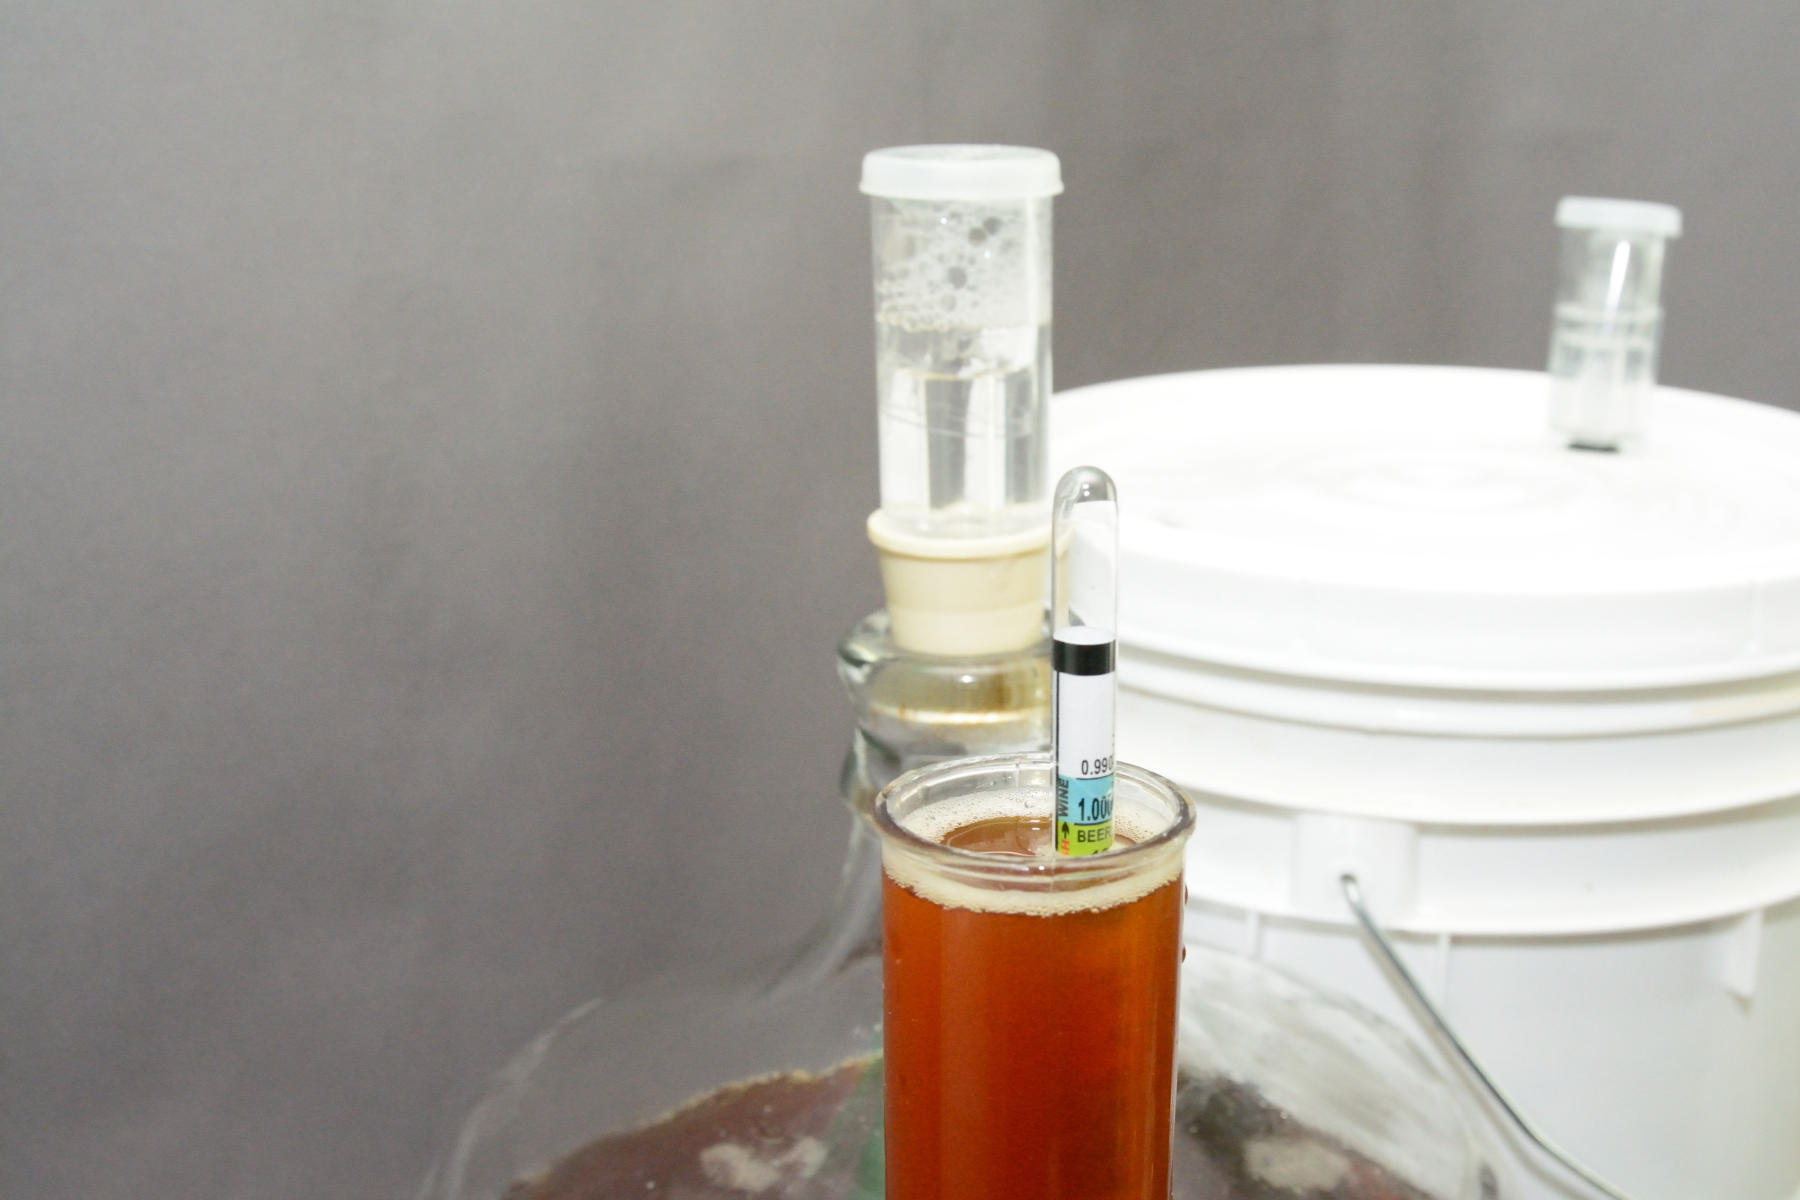 How To Use The Hydrometer